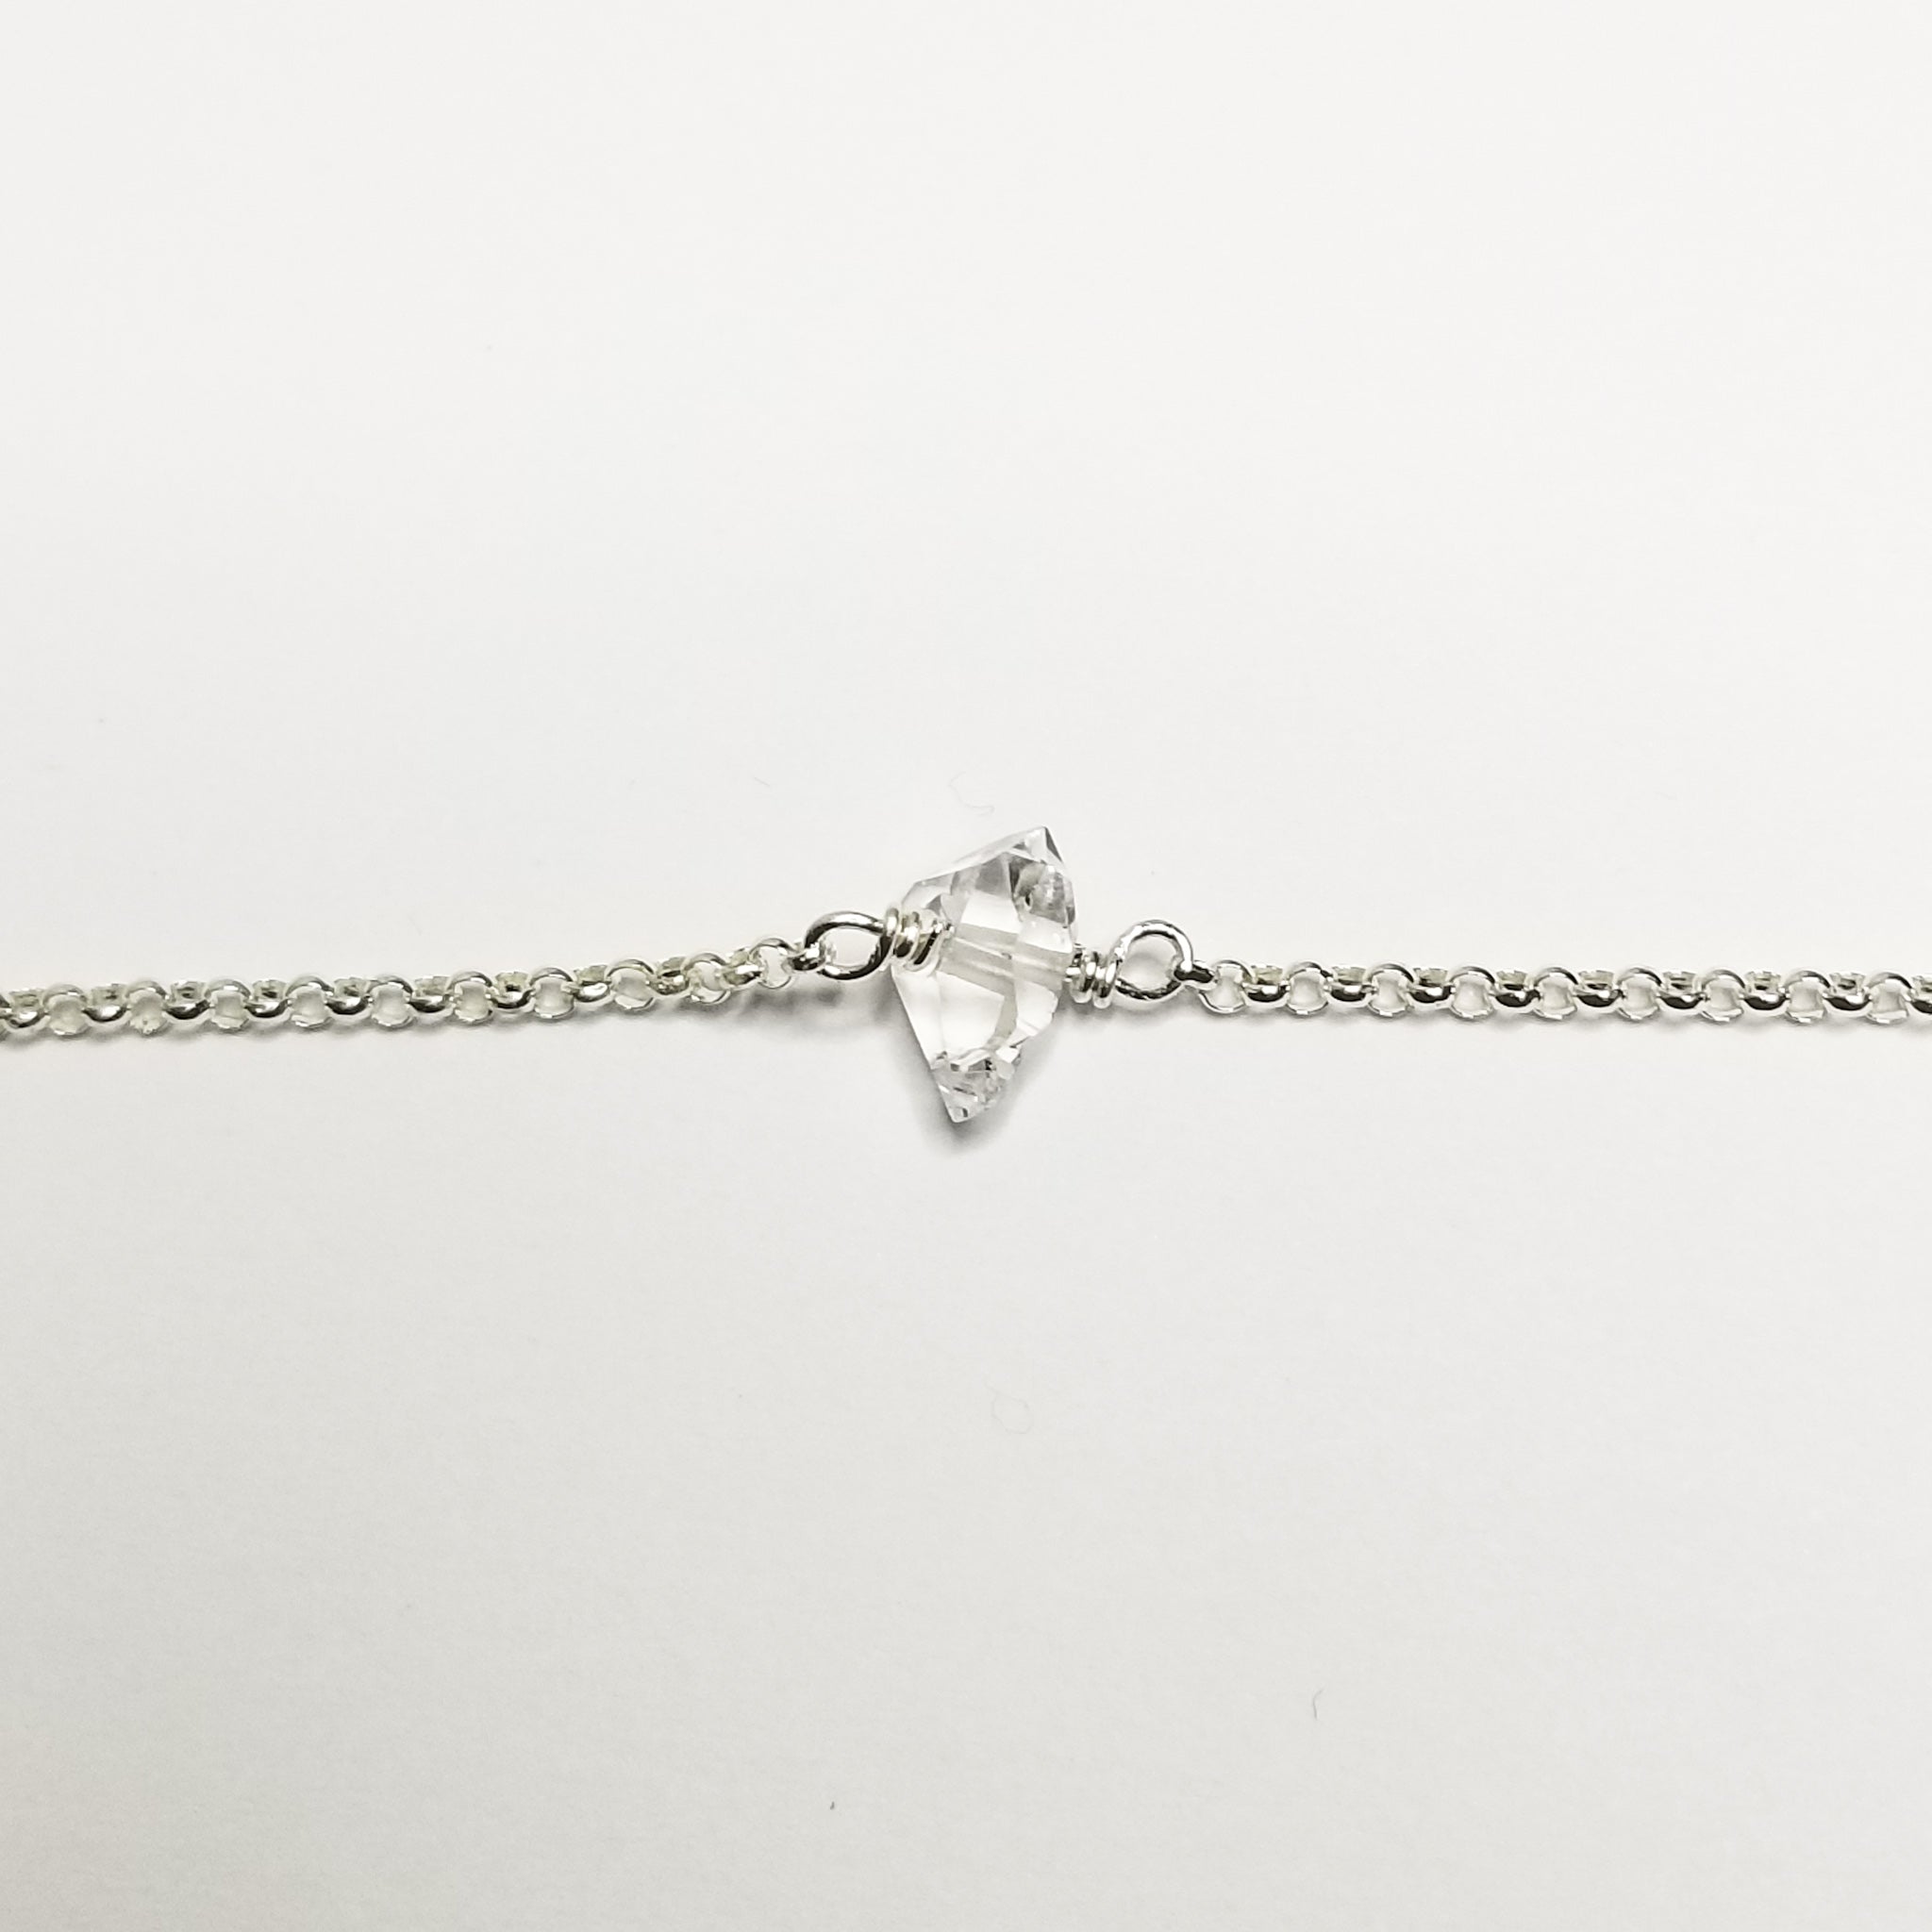 a herkimer diamond on a silver chain with a white background